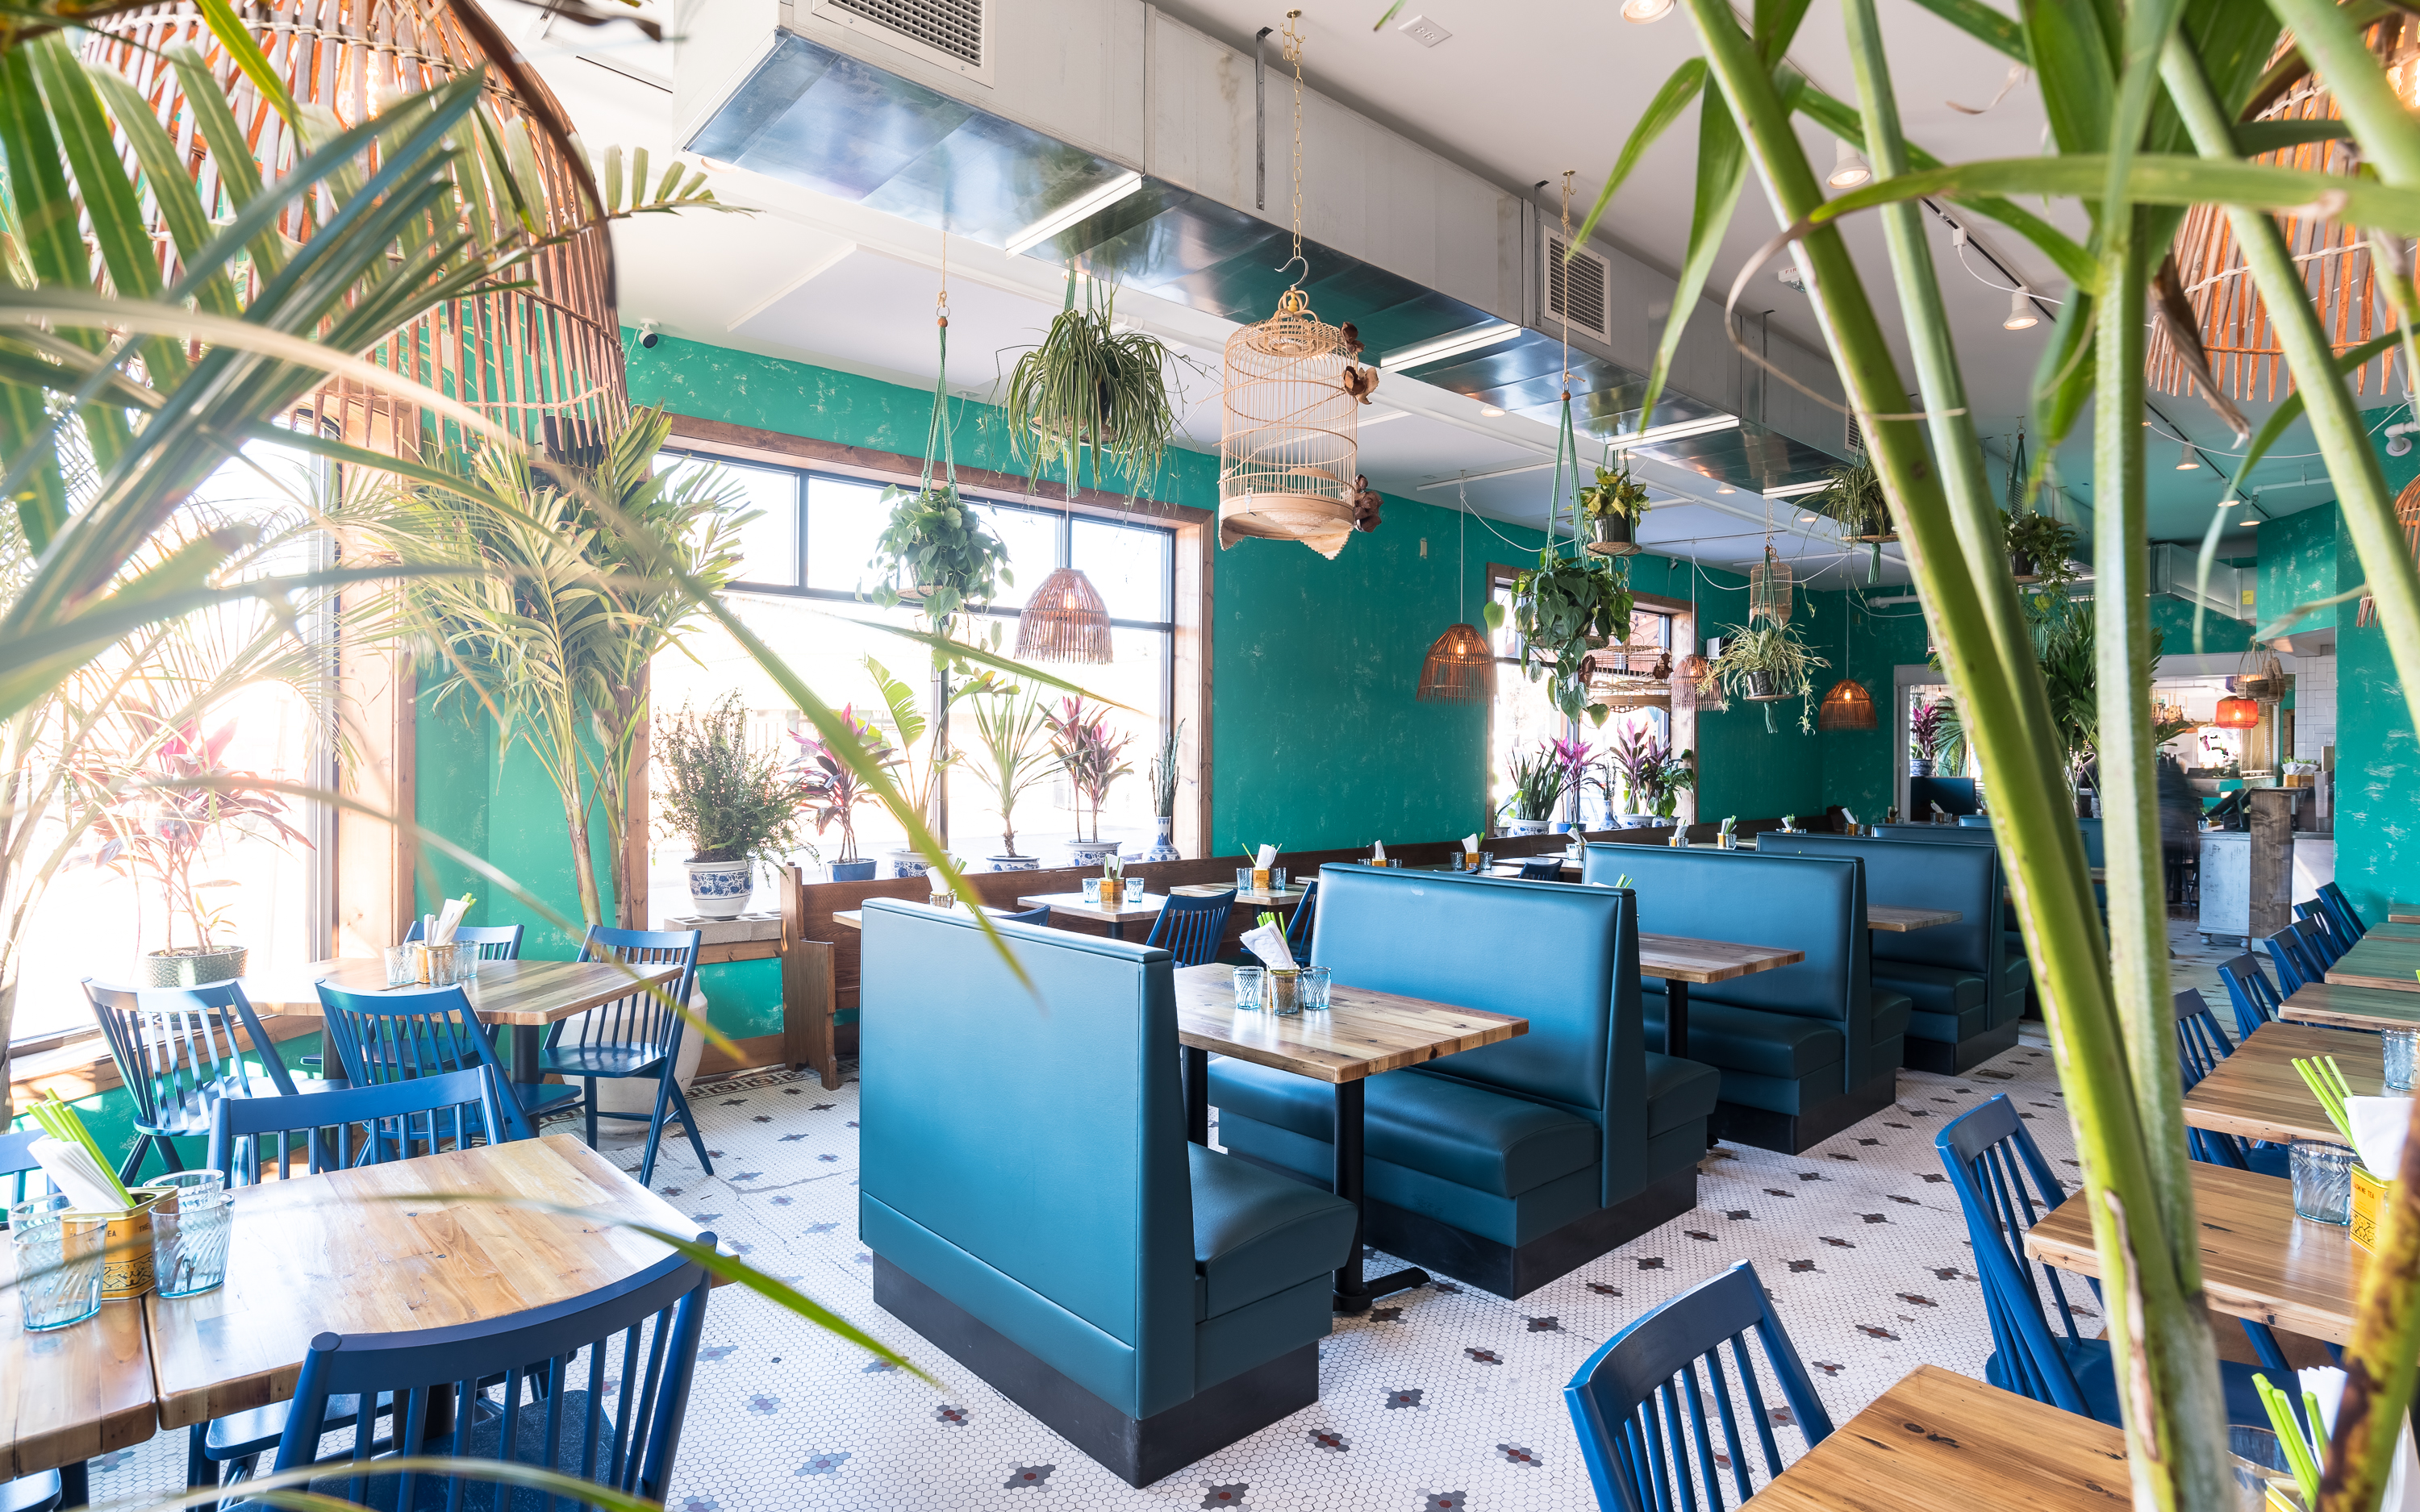 The brightly colored blue interior of Hai Hai, decorated with palm tree plants